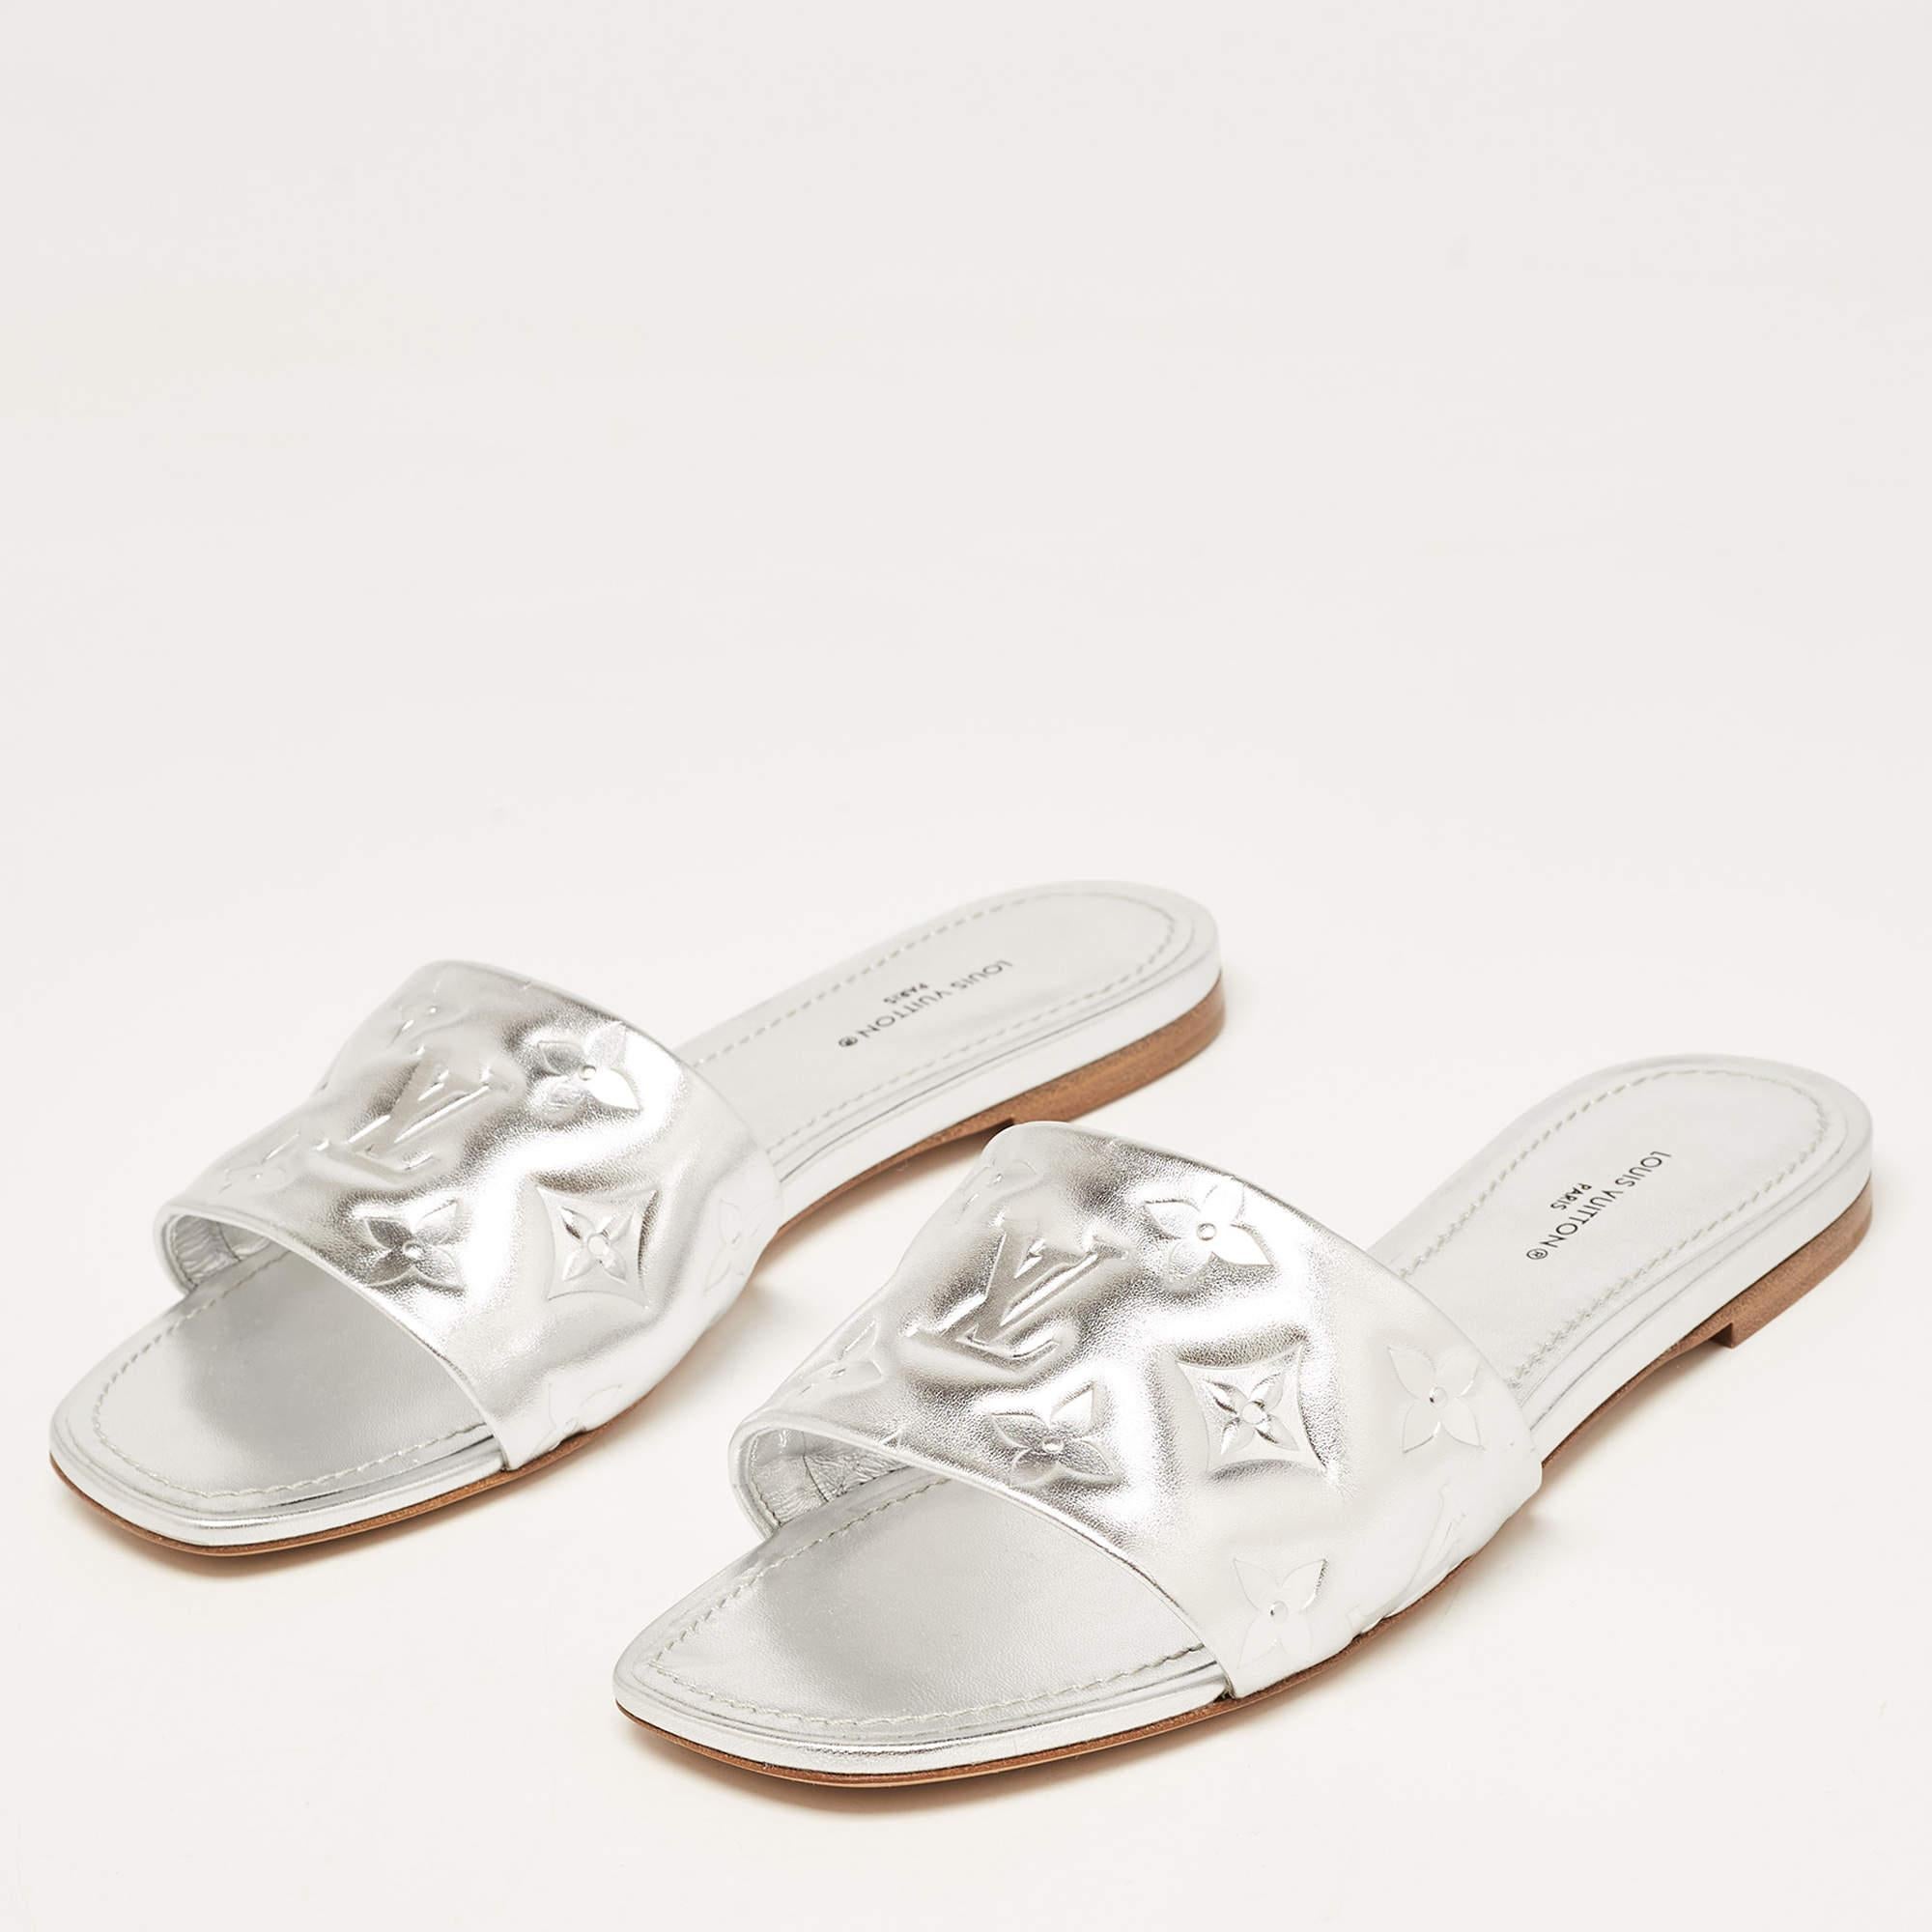 Women's Enhance your casual looks with a touch of high style with these designer slides.